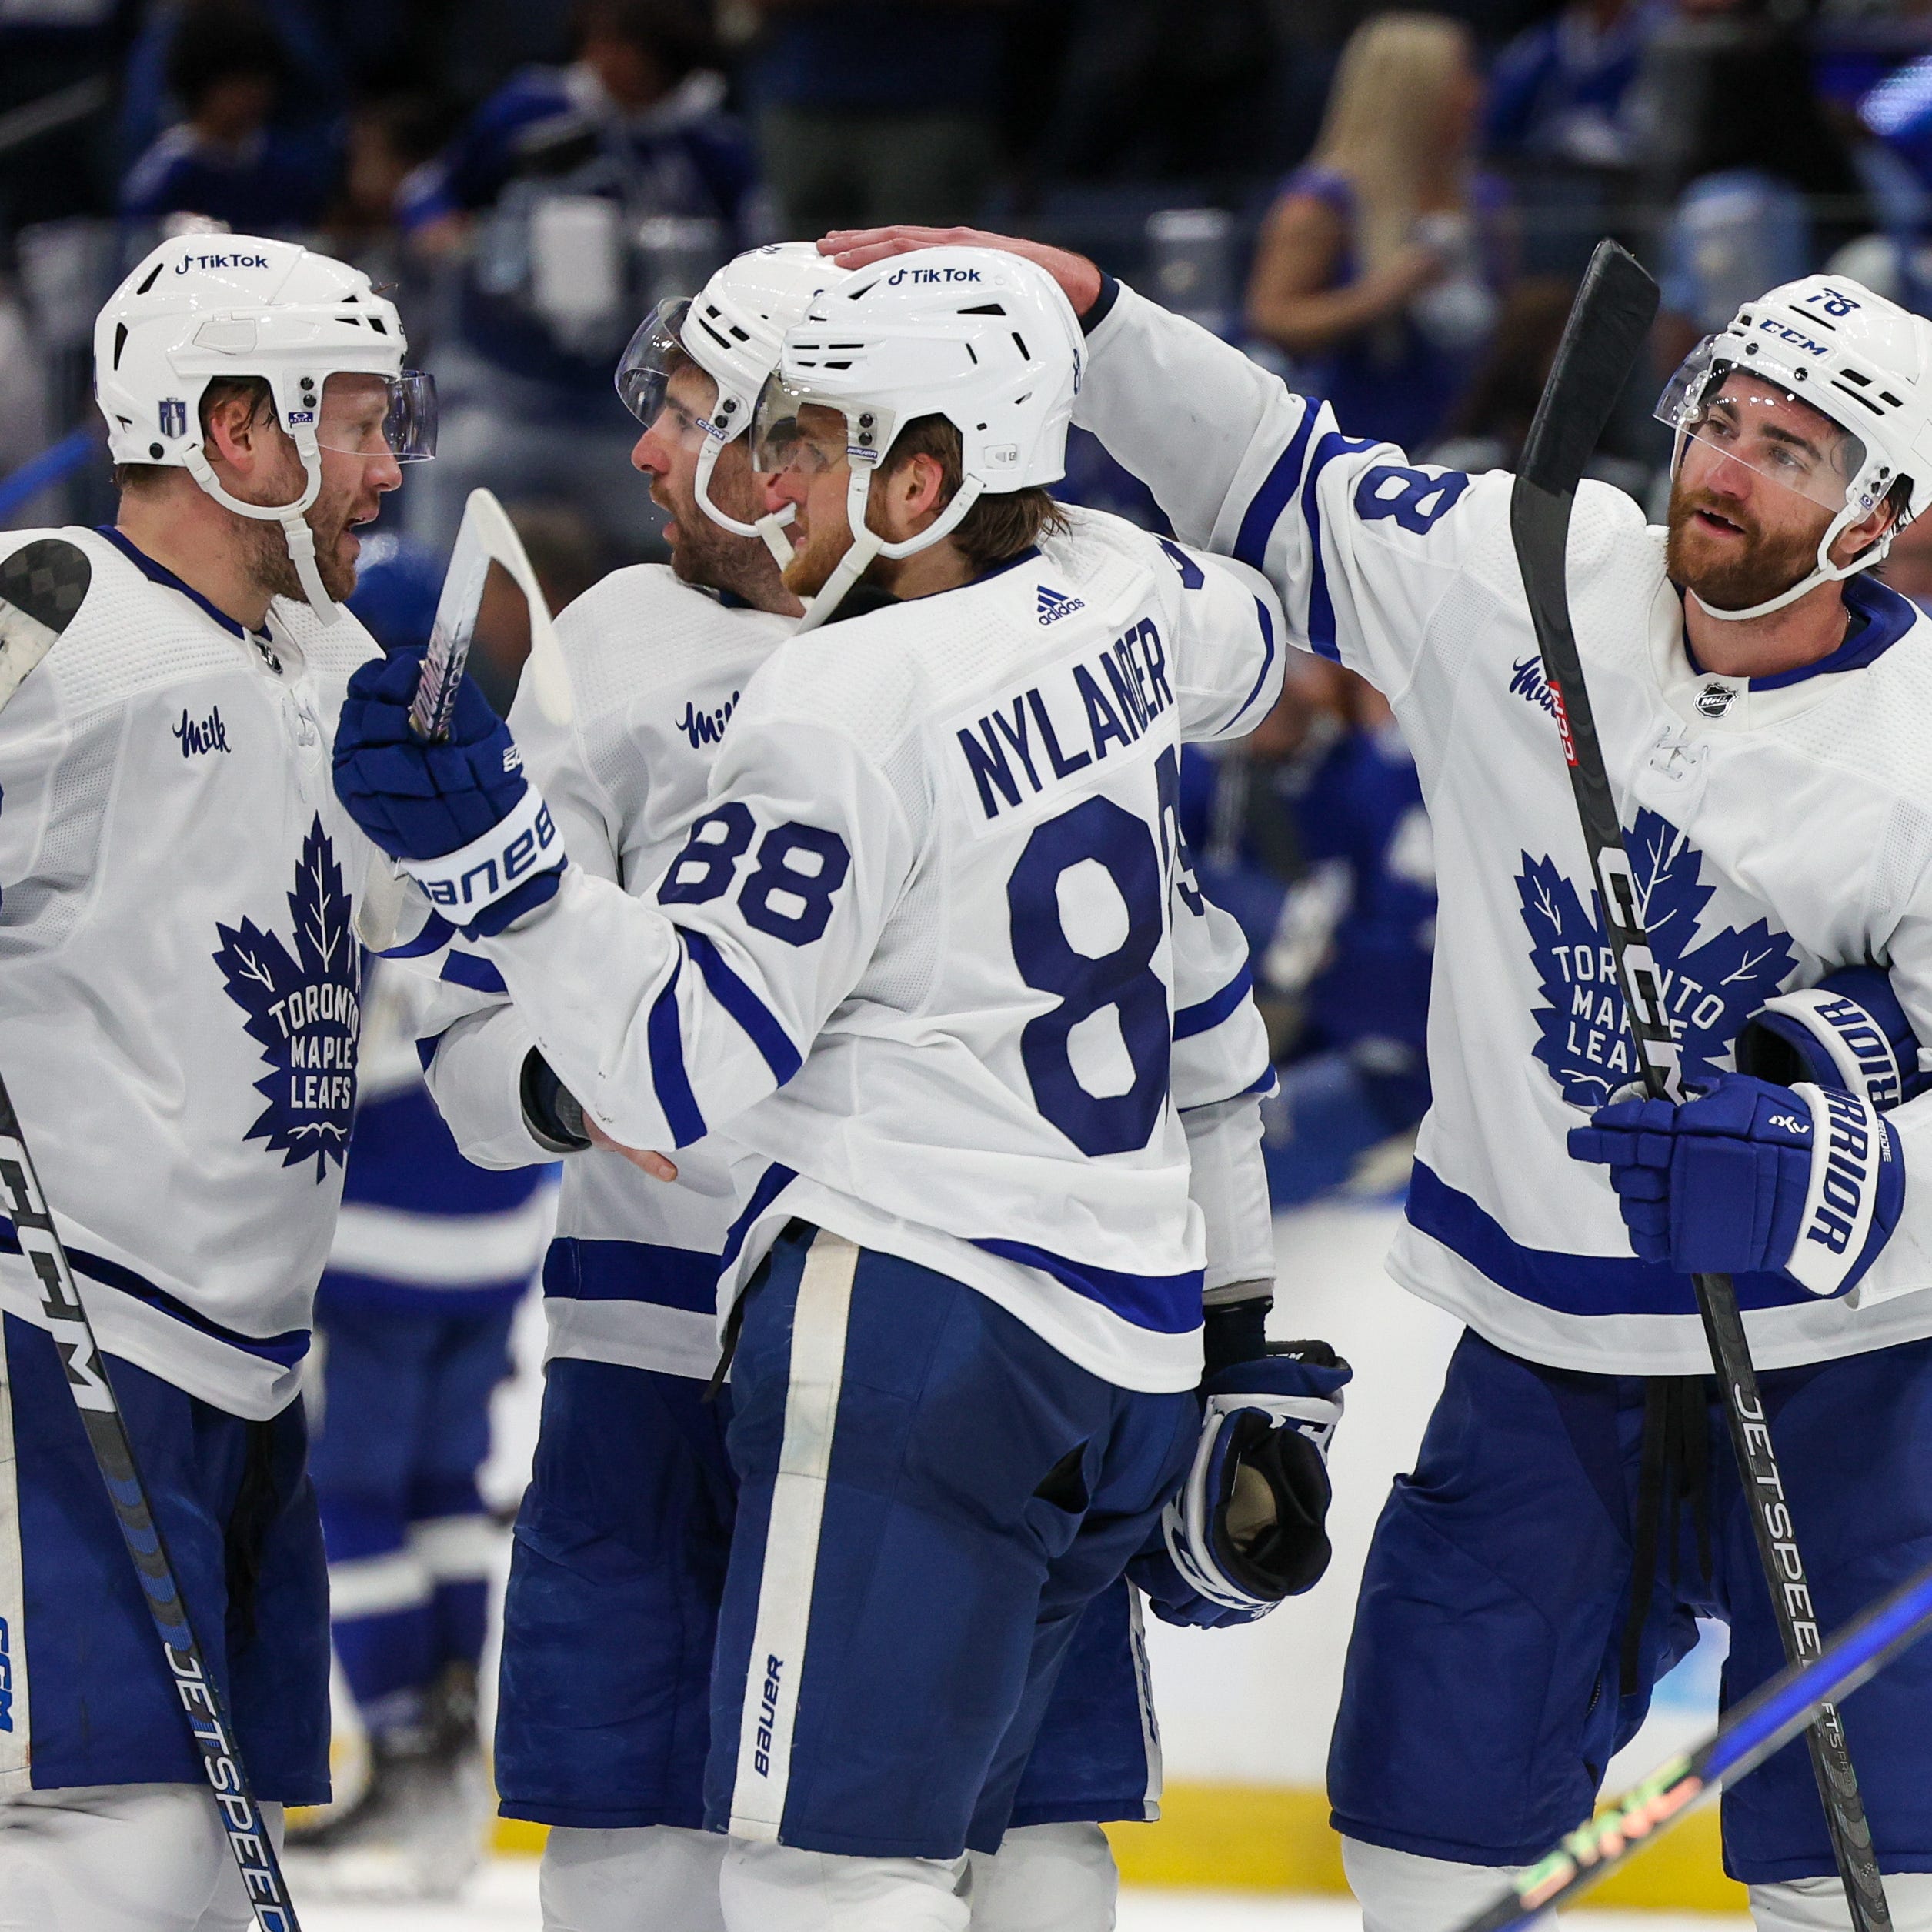 The Toronto Maple Leafs celebrate after beating the Tampa Bay Lightning in overtime during Game 6.